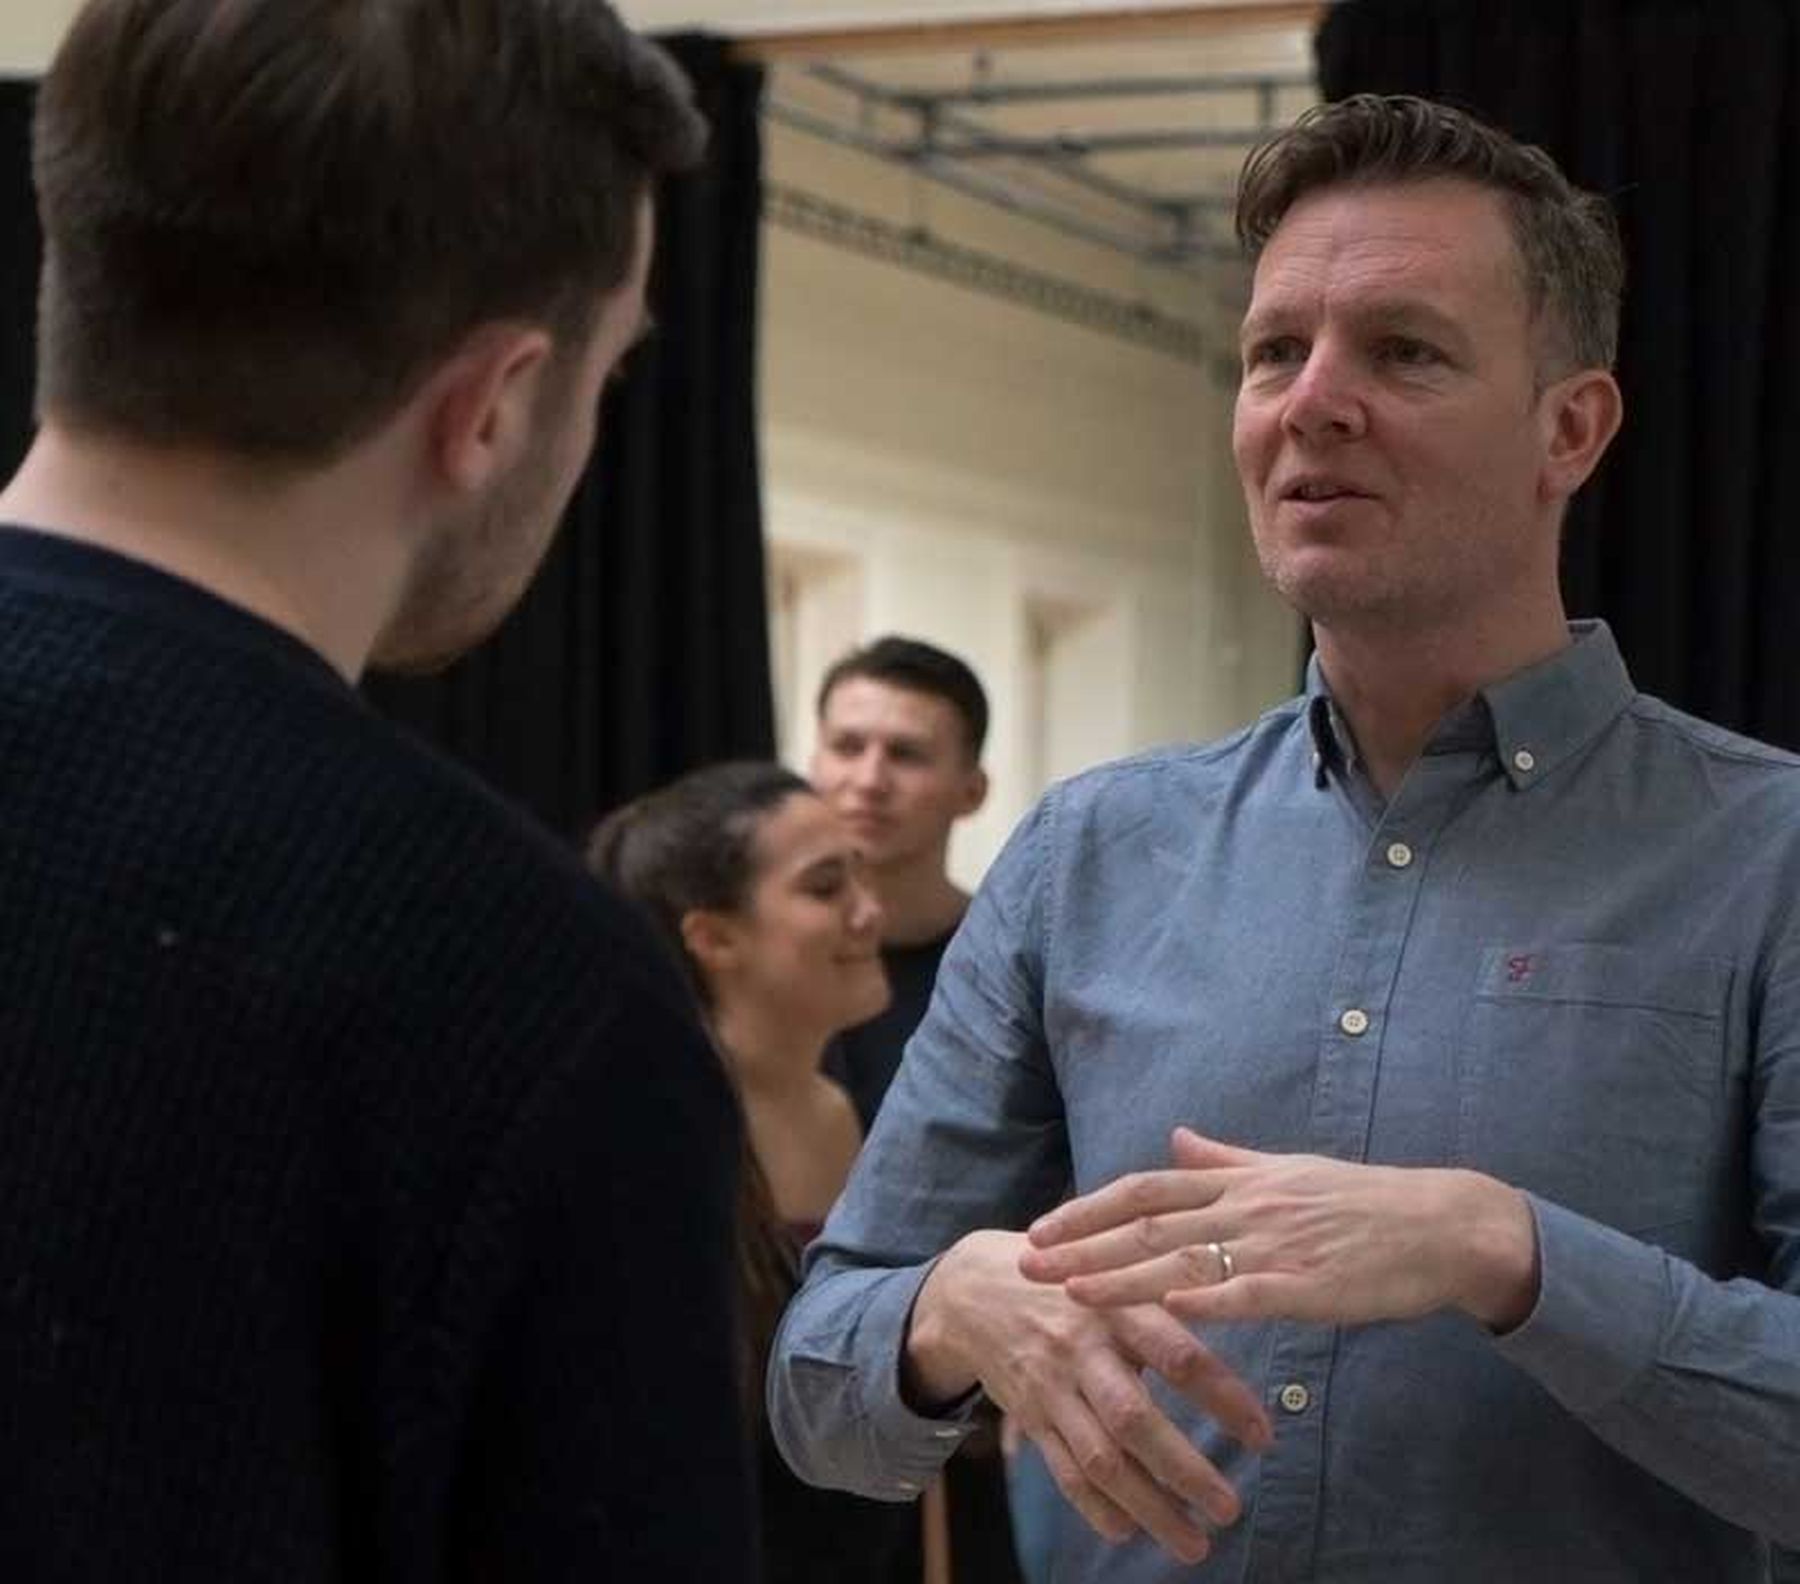 LIPA’s new Acting MA promises touring opportunities to students